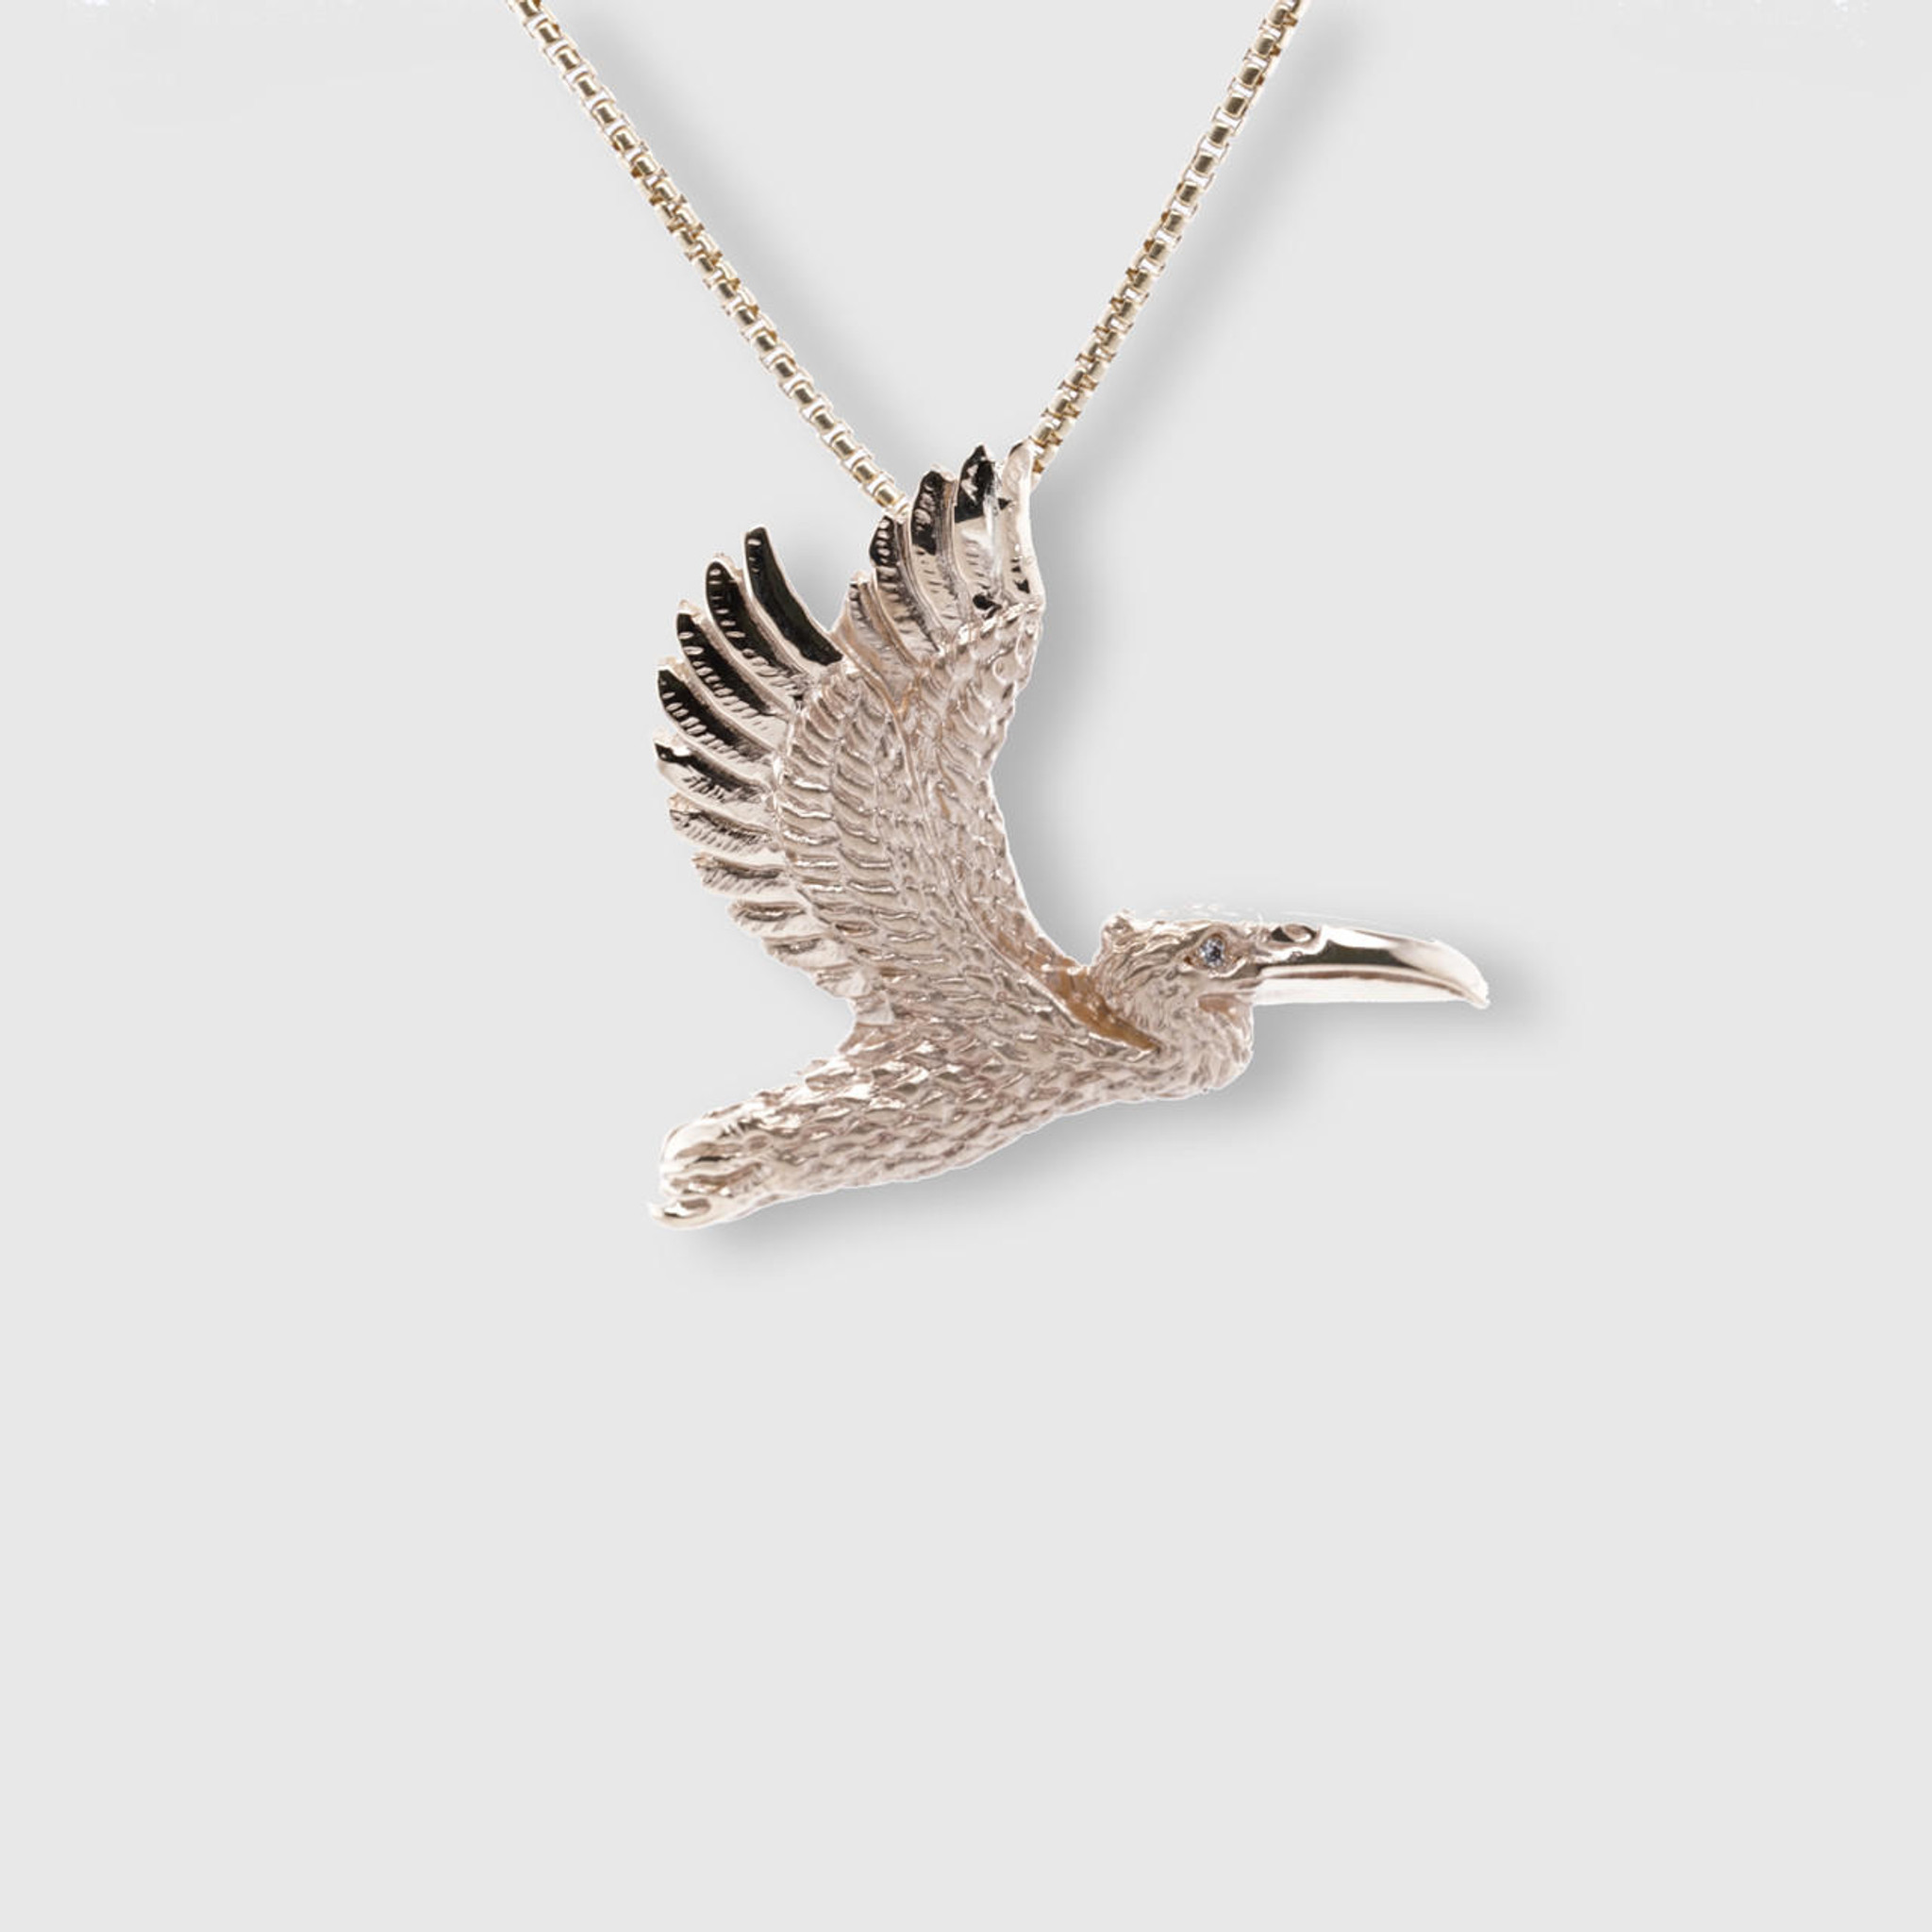 World on a String Pelican Pendant Necklace with Diamond Eye, 14kt Yellow Gold 